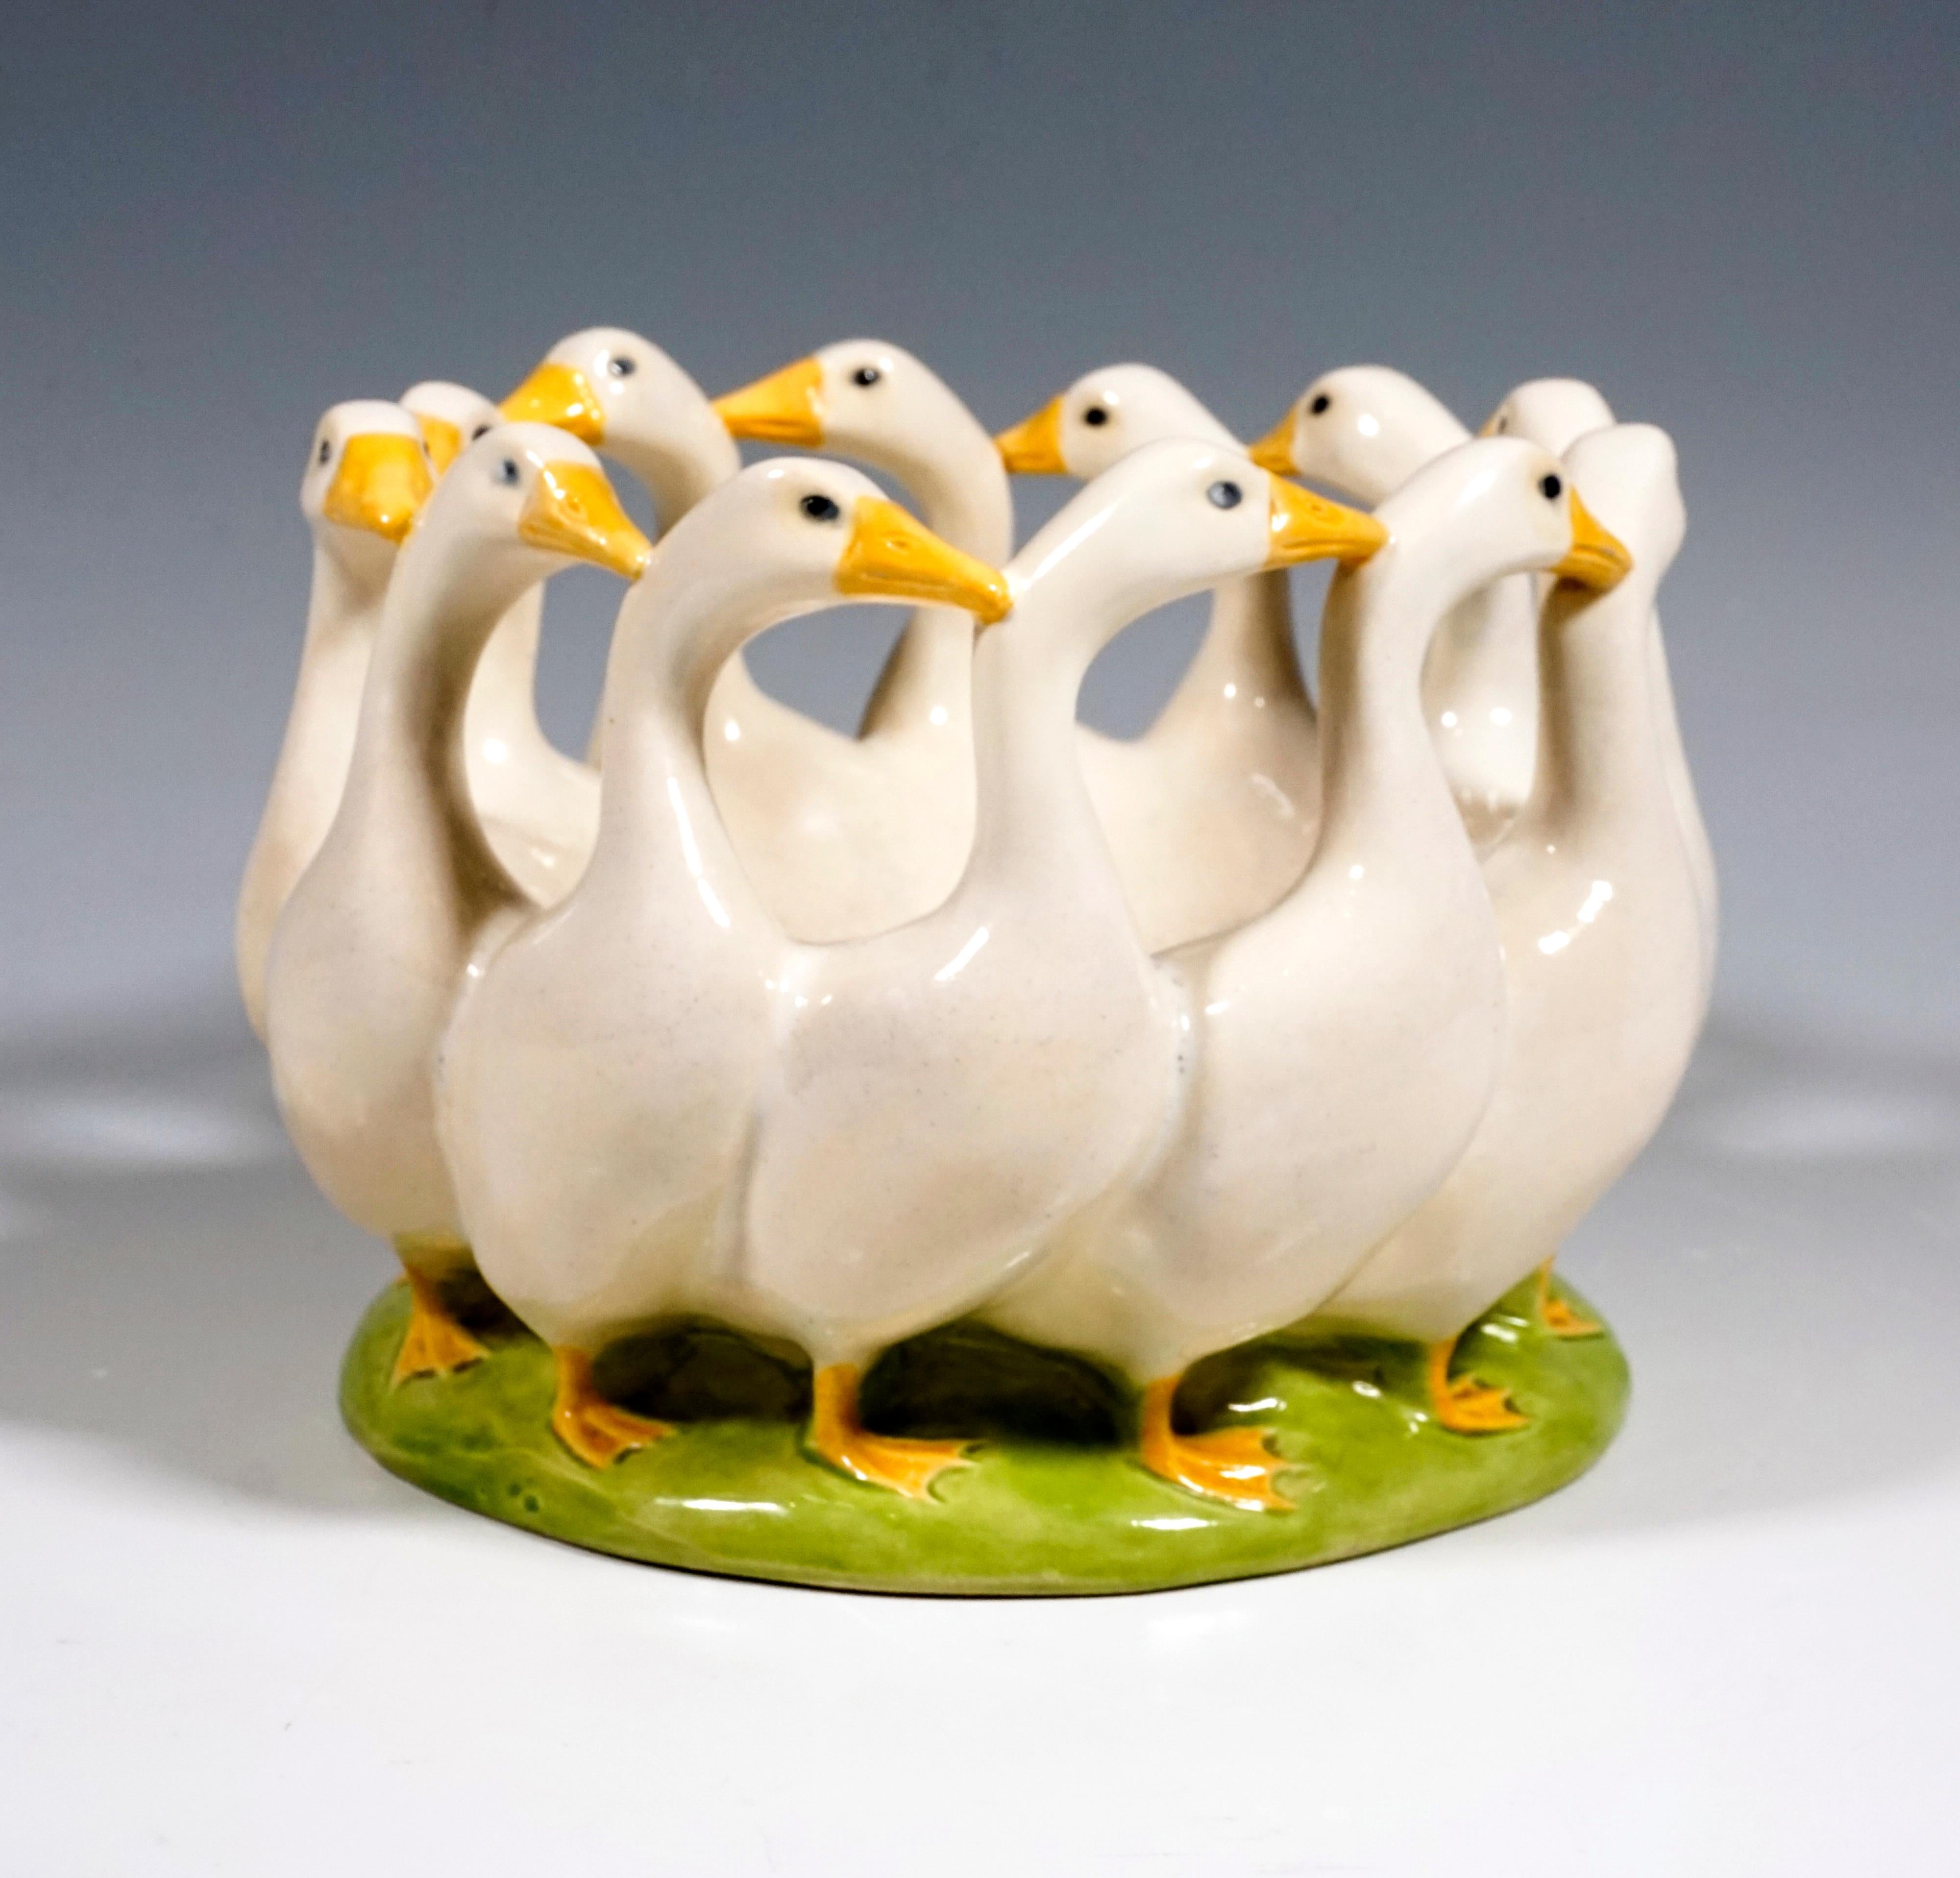 Art Nouveau ceramic centerpiece, twelve geese designed in a circle to form a bowl. White earthenware painted in color and glazed.

Designed by Michael MÖRTL (1878 - 1939) around 1905

Manufactured by 'Wiener Kunstkeramische Werkstätte' /= Vienna